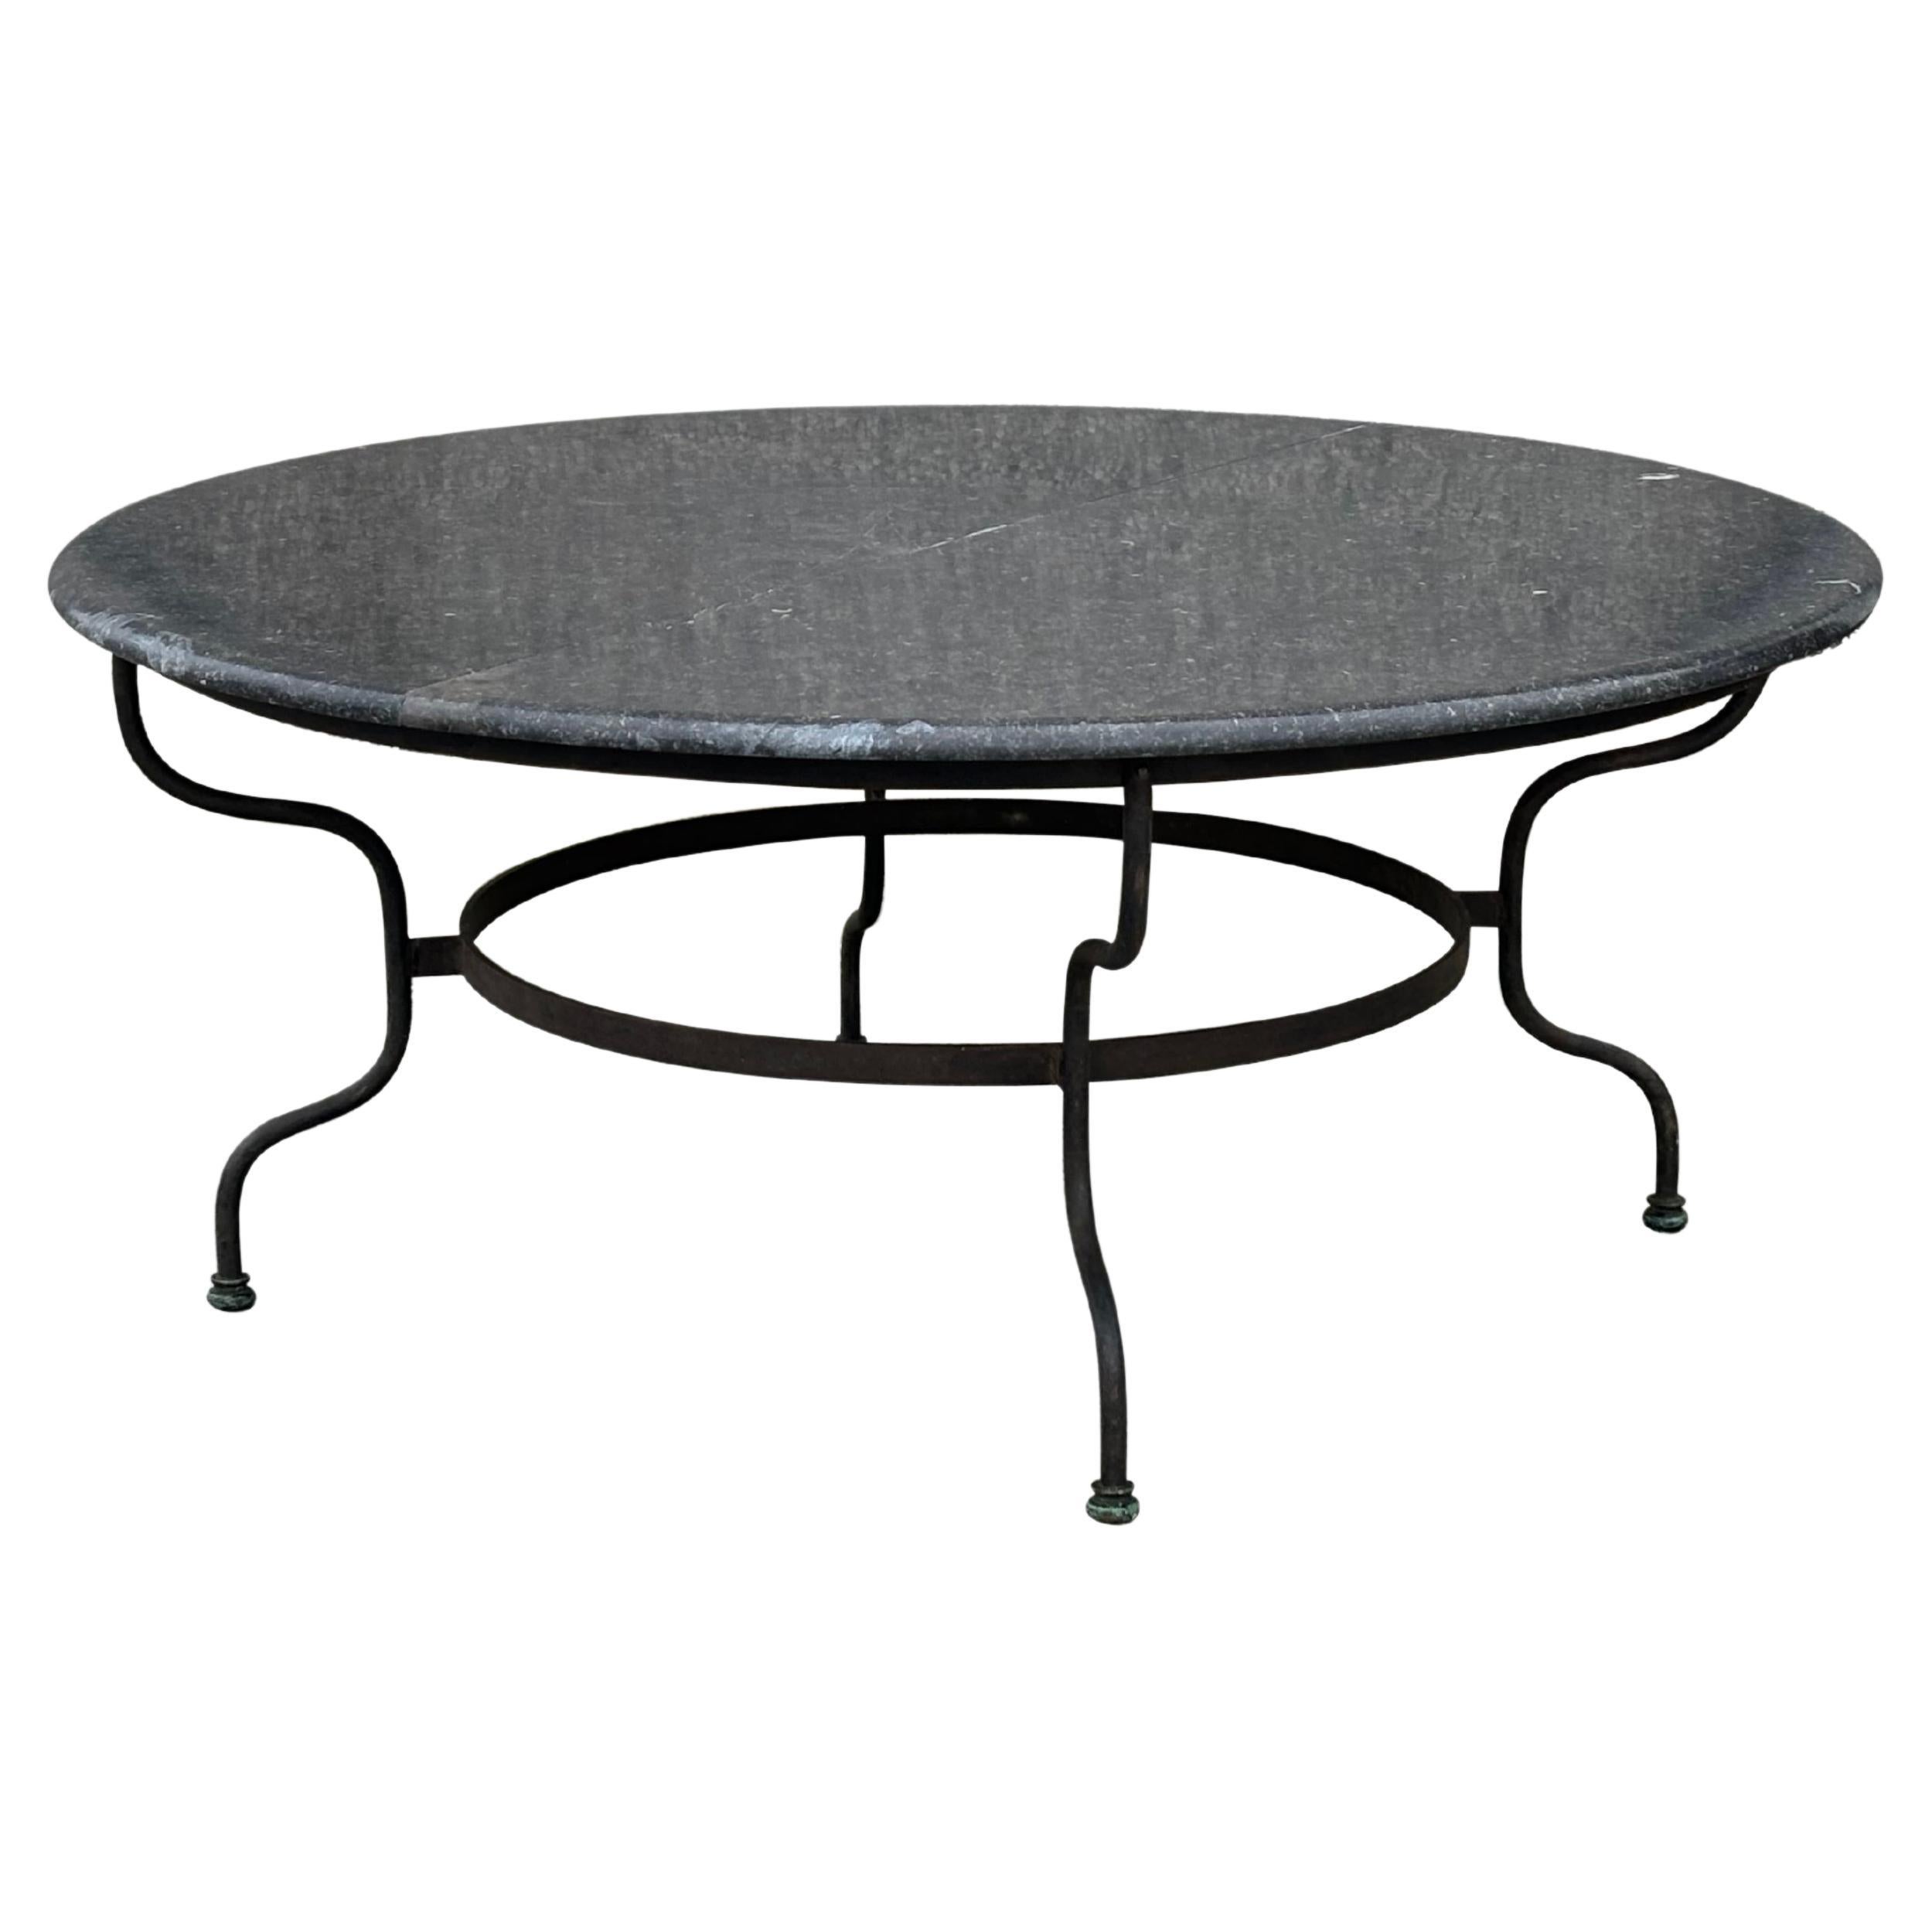 Large French Circular Granite Top Garden Patio Dining Table For Sale